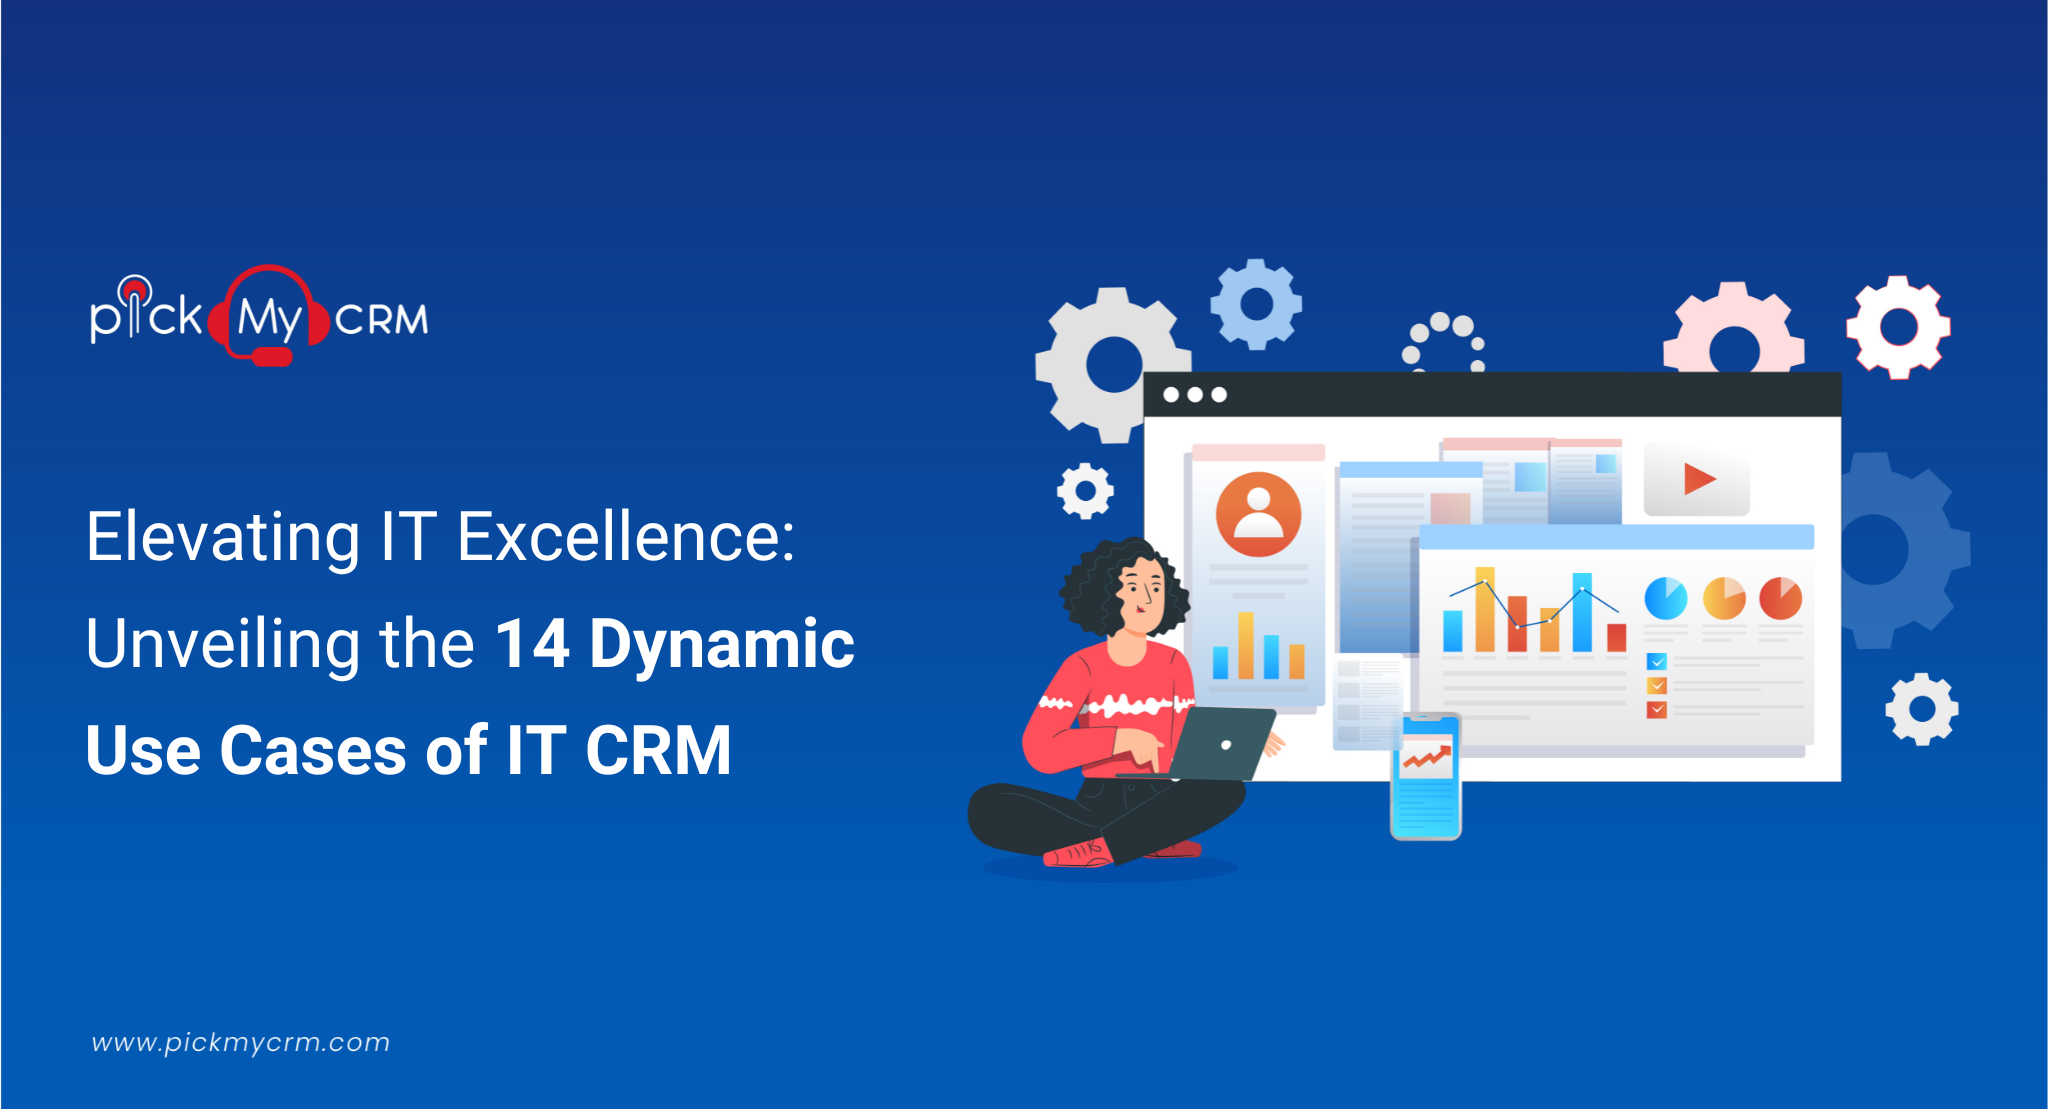 Elevating IT Excellence: Unveiling the 14 Dynamic Use Cases of IT CRM